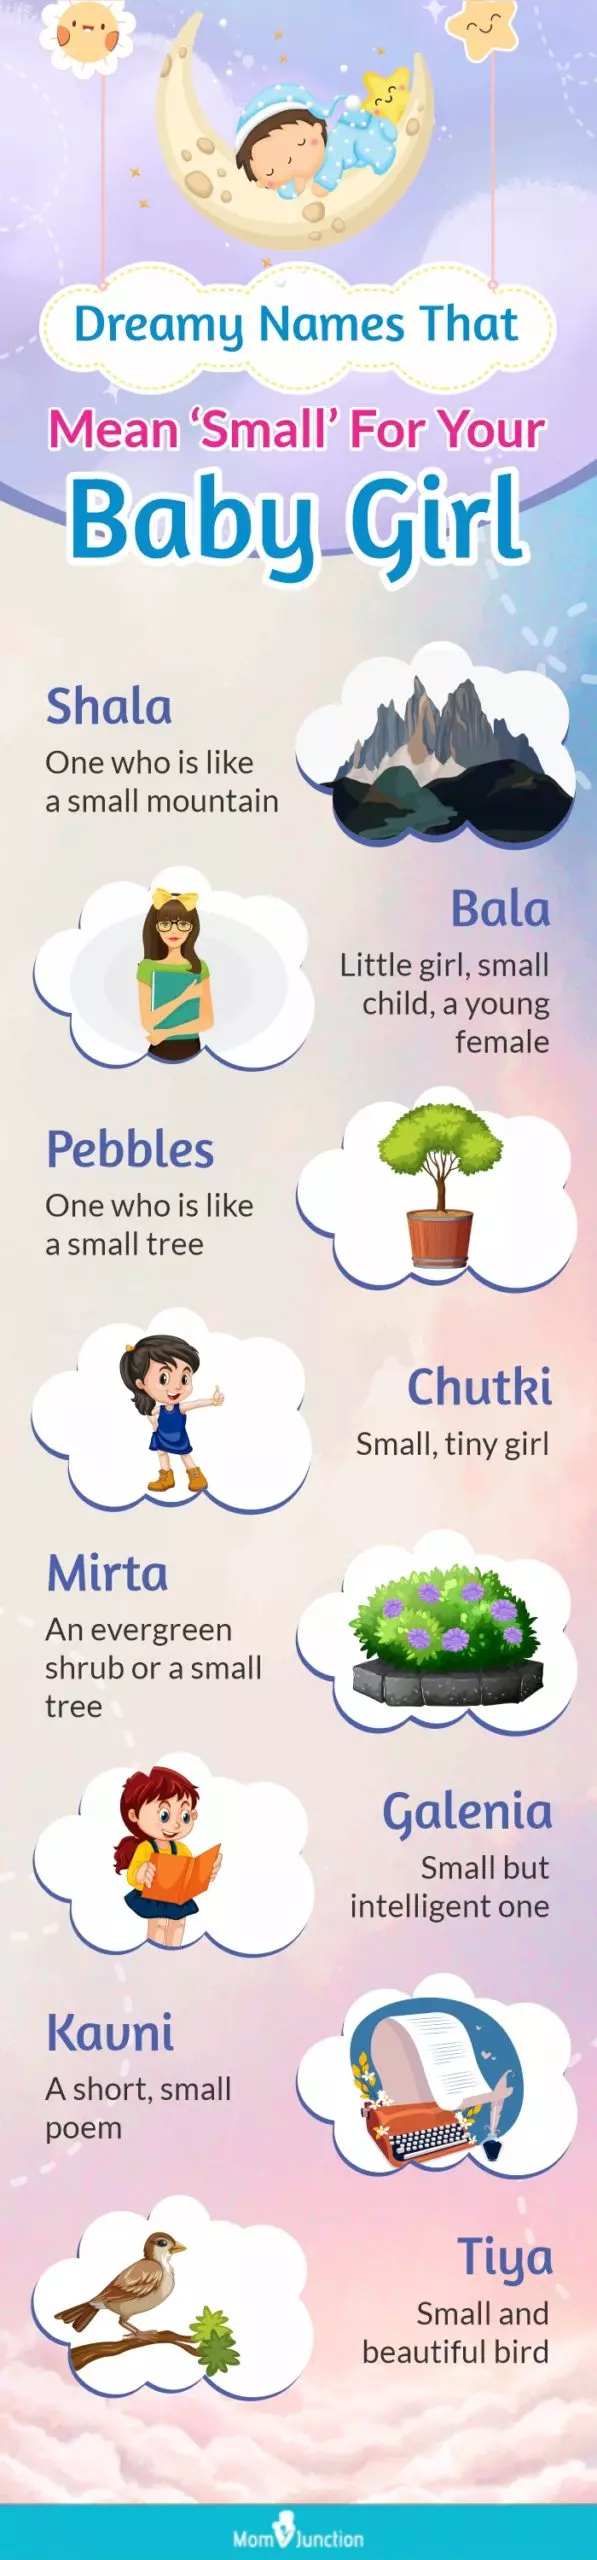 dreamy names that mean small for your baby girl (infographic)